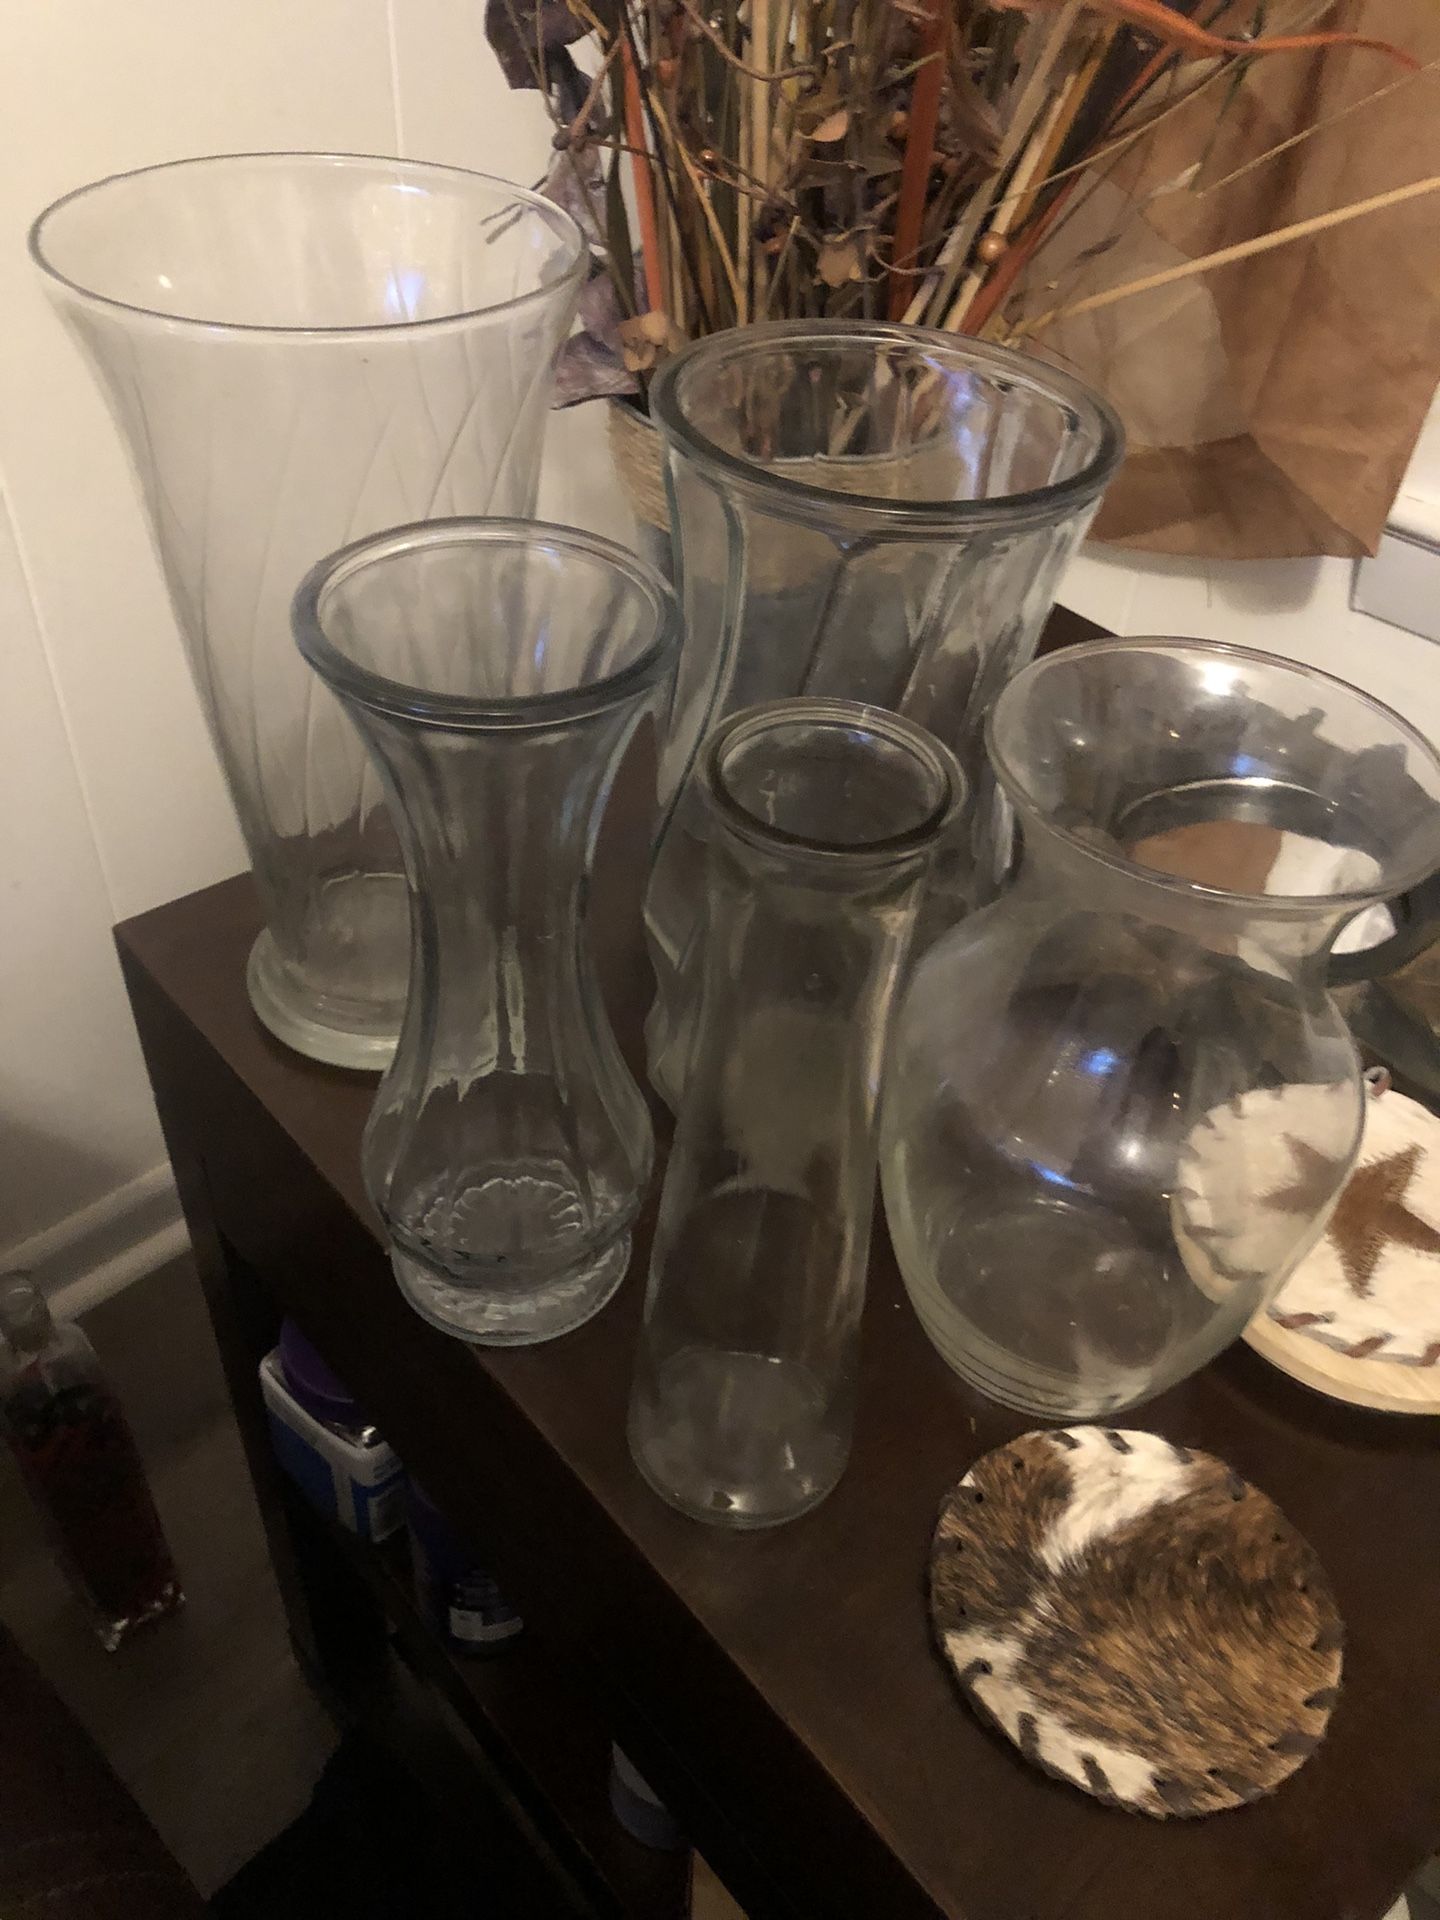 A Bundle of 5 Clear Flower vases (range from sizes 2 Dozen, down to Bud Vases)